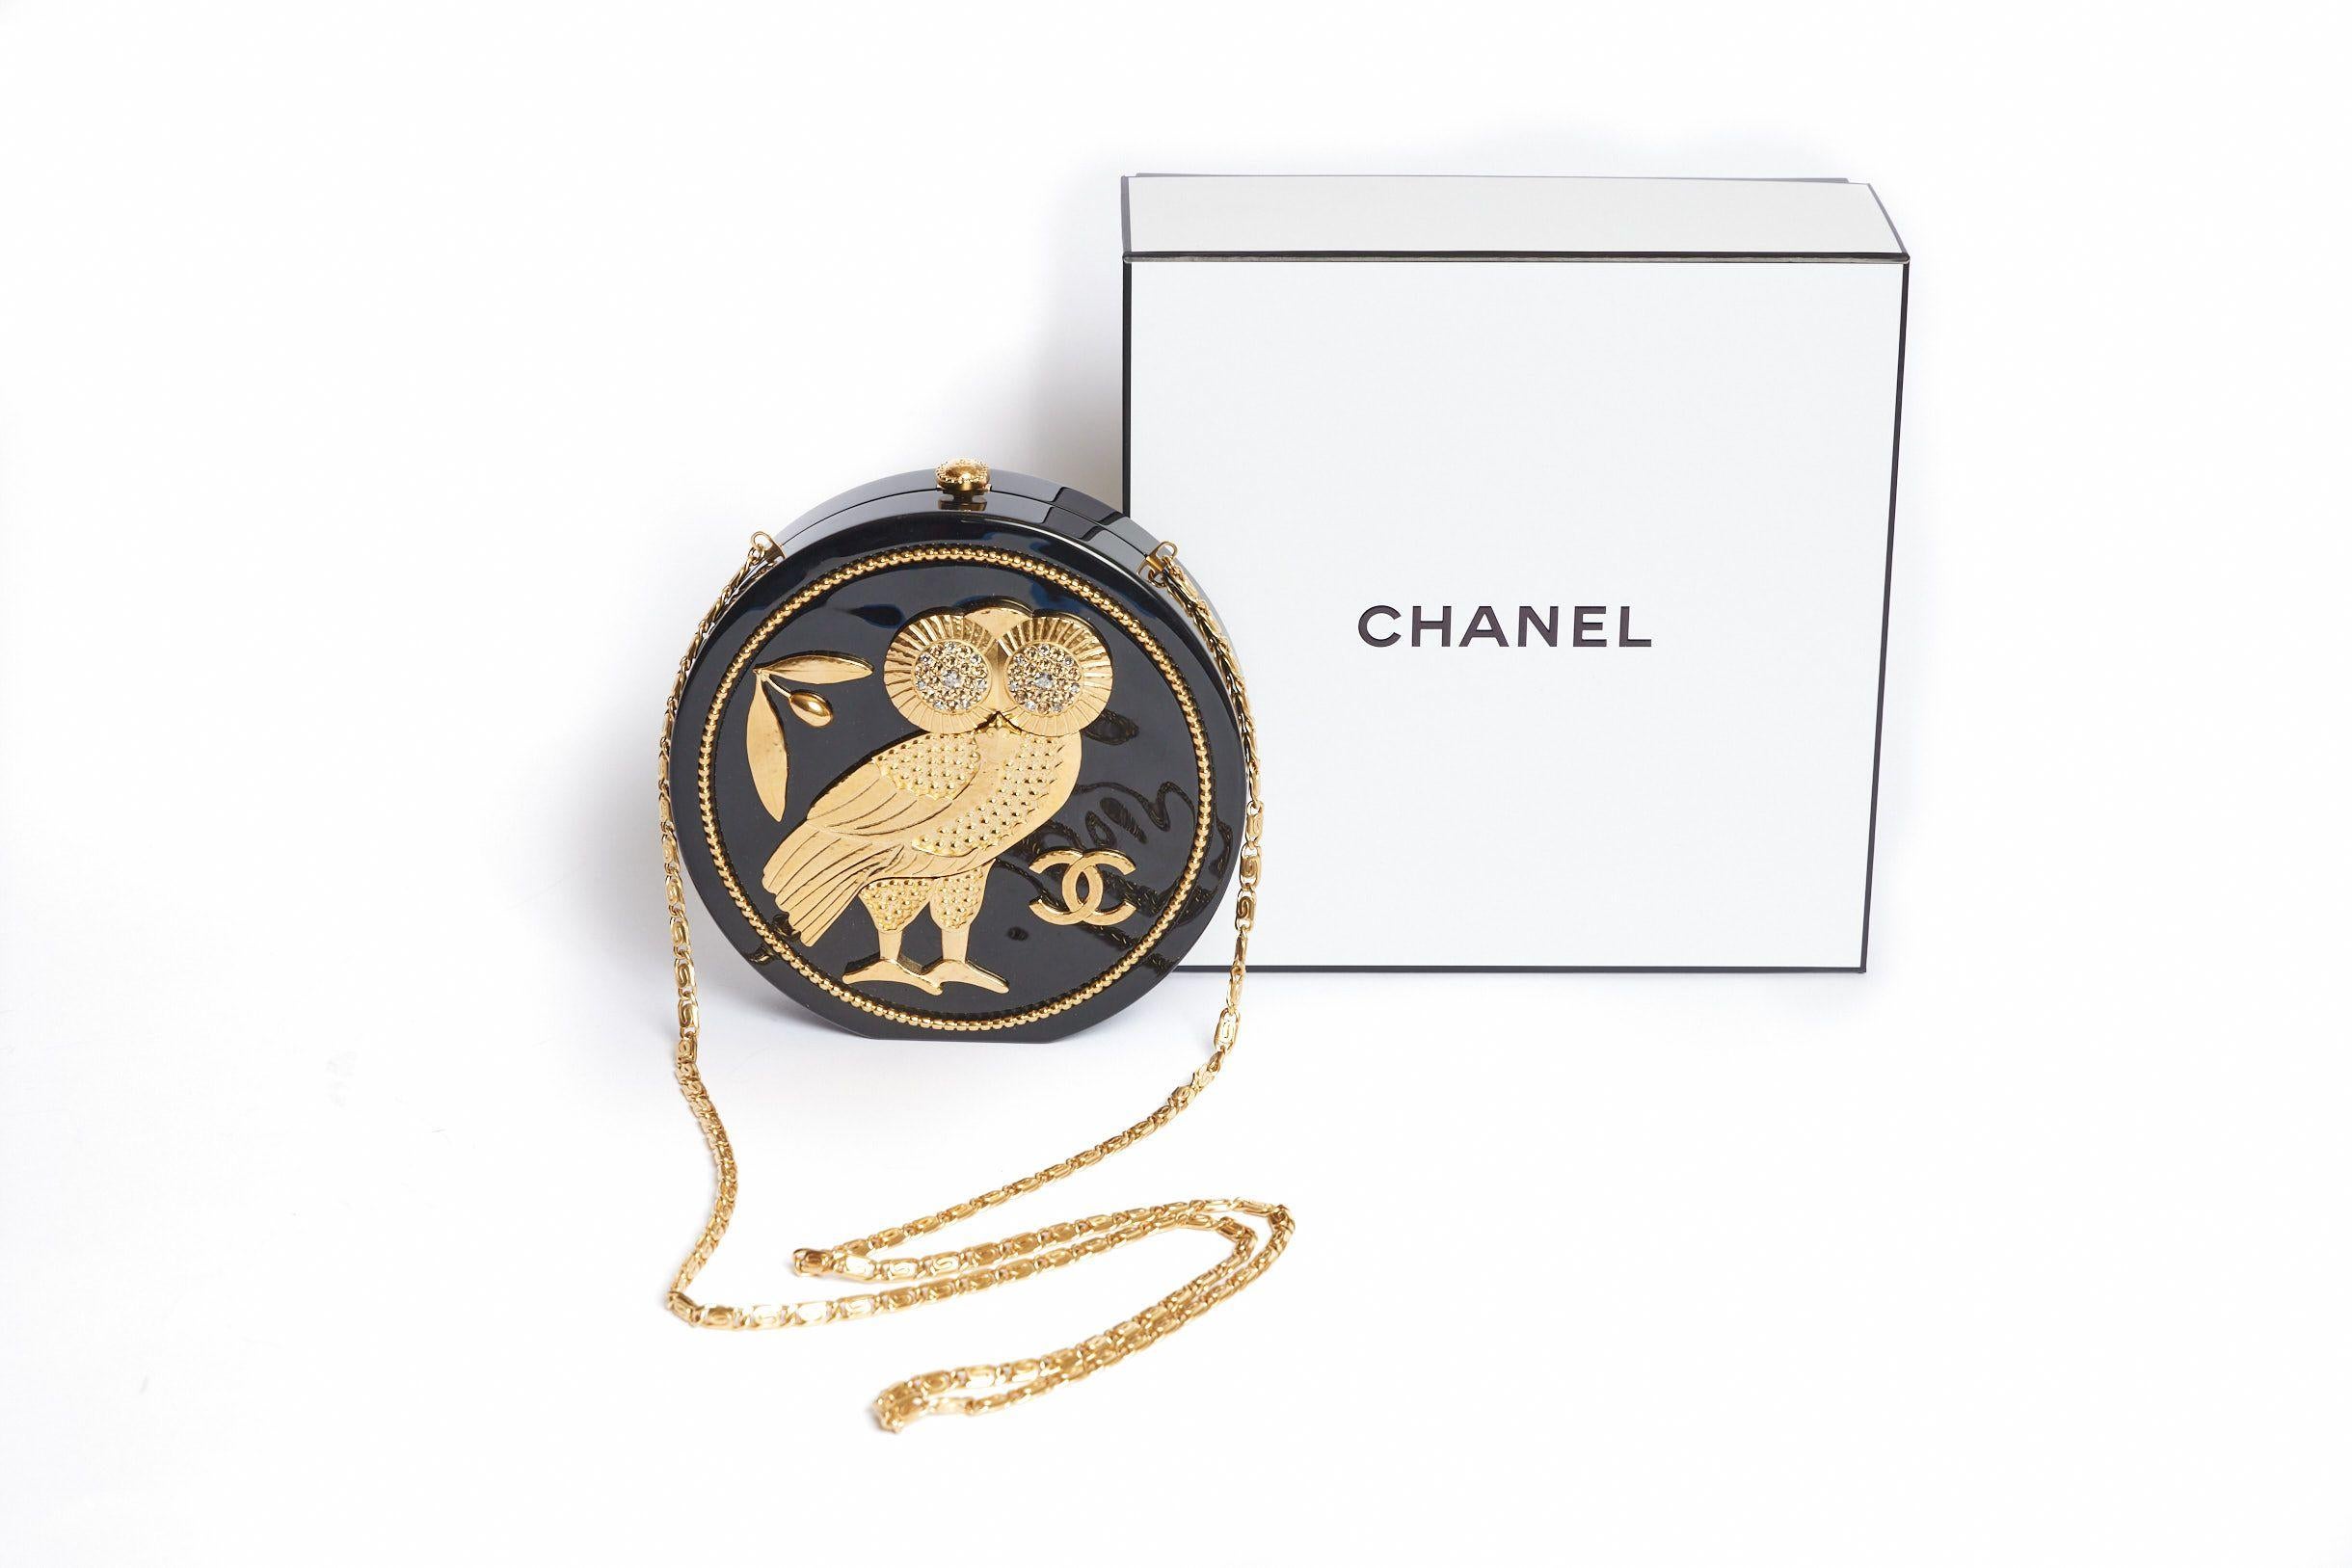 Chanel highly collectible limited edition runway cruise 2018 black lucite and gold owl bag.
Can be worn as a clutch or as crossbody with a gold jewel chain that can be hidden inside.
The bag is brand new , with hologram, ID card (still wrapped in